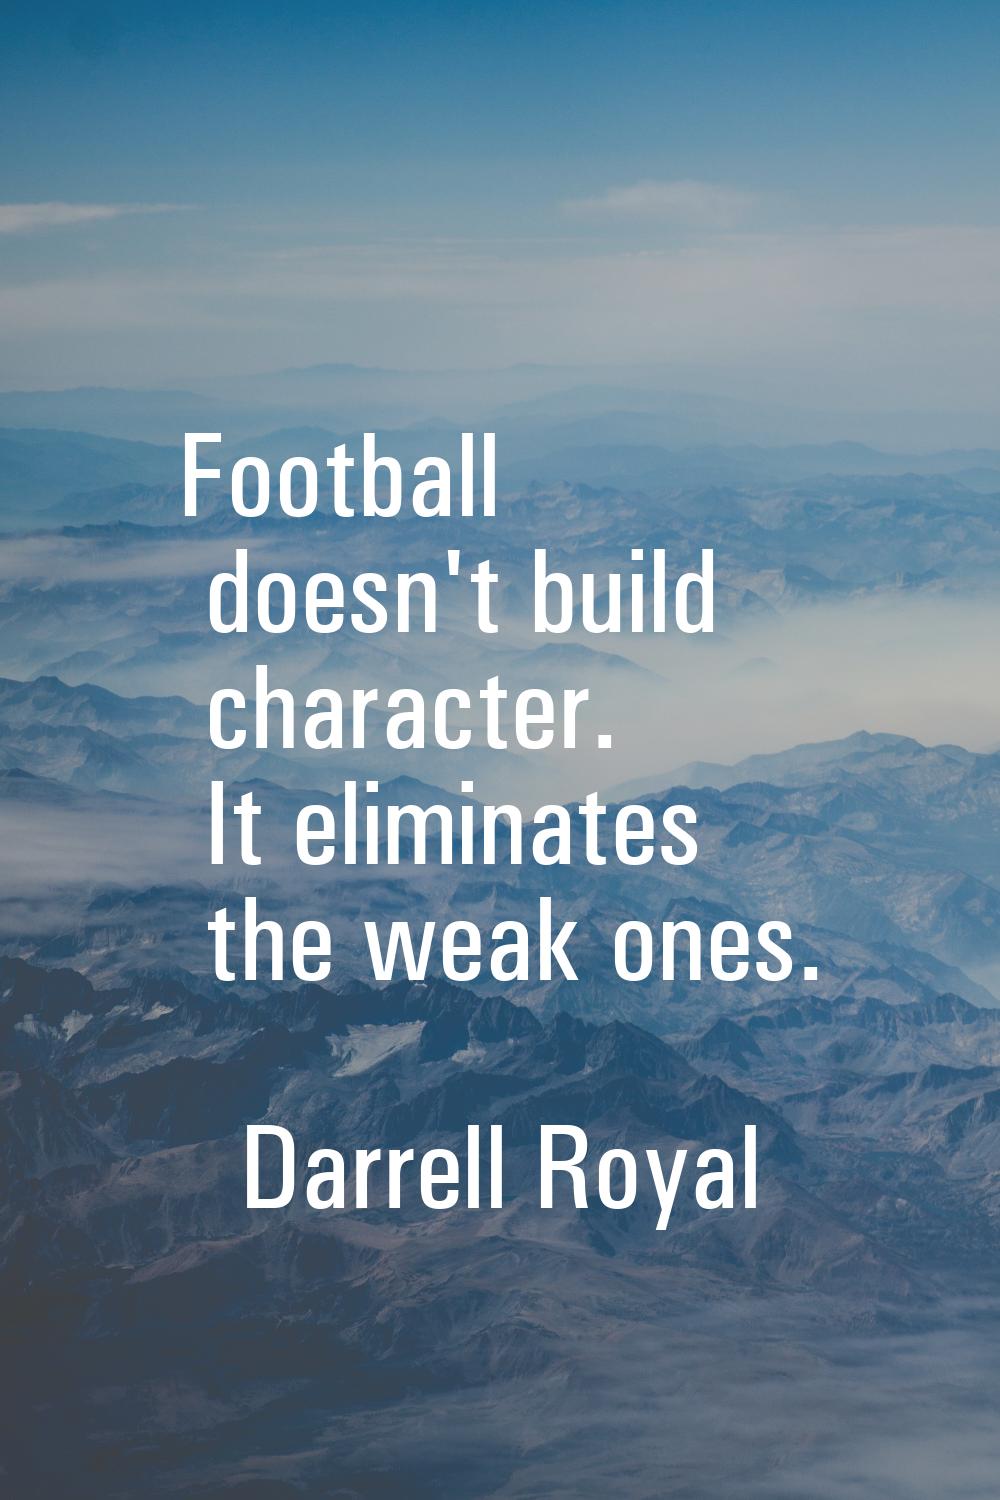 Football doesn't build character. It eliminates the weak ones.